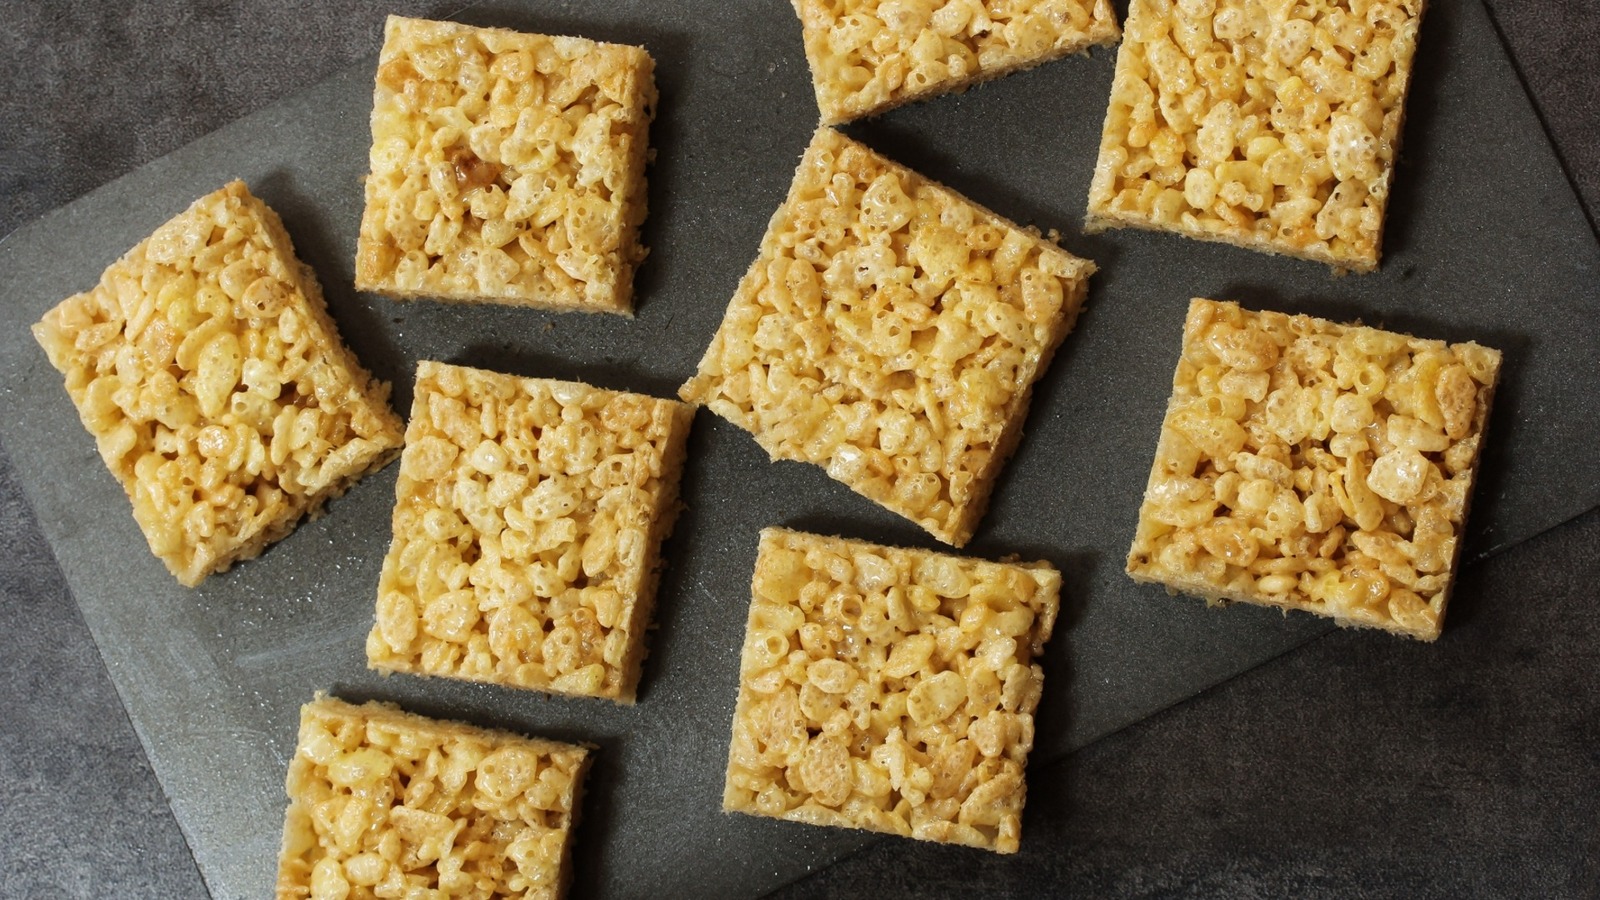 Swap Rice Krispies With Potato Chips For A Sweet And Salty Snack